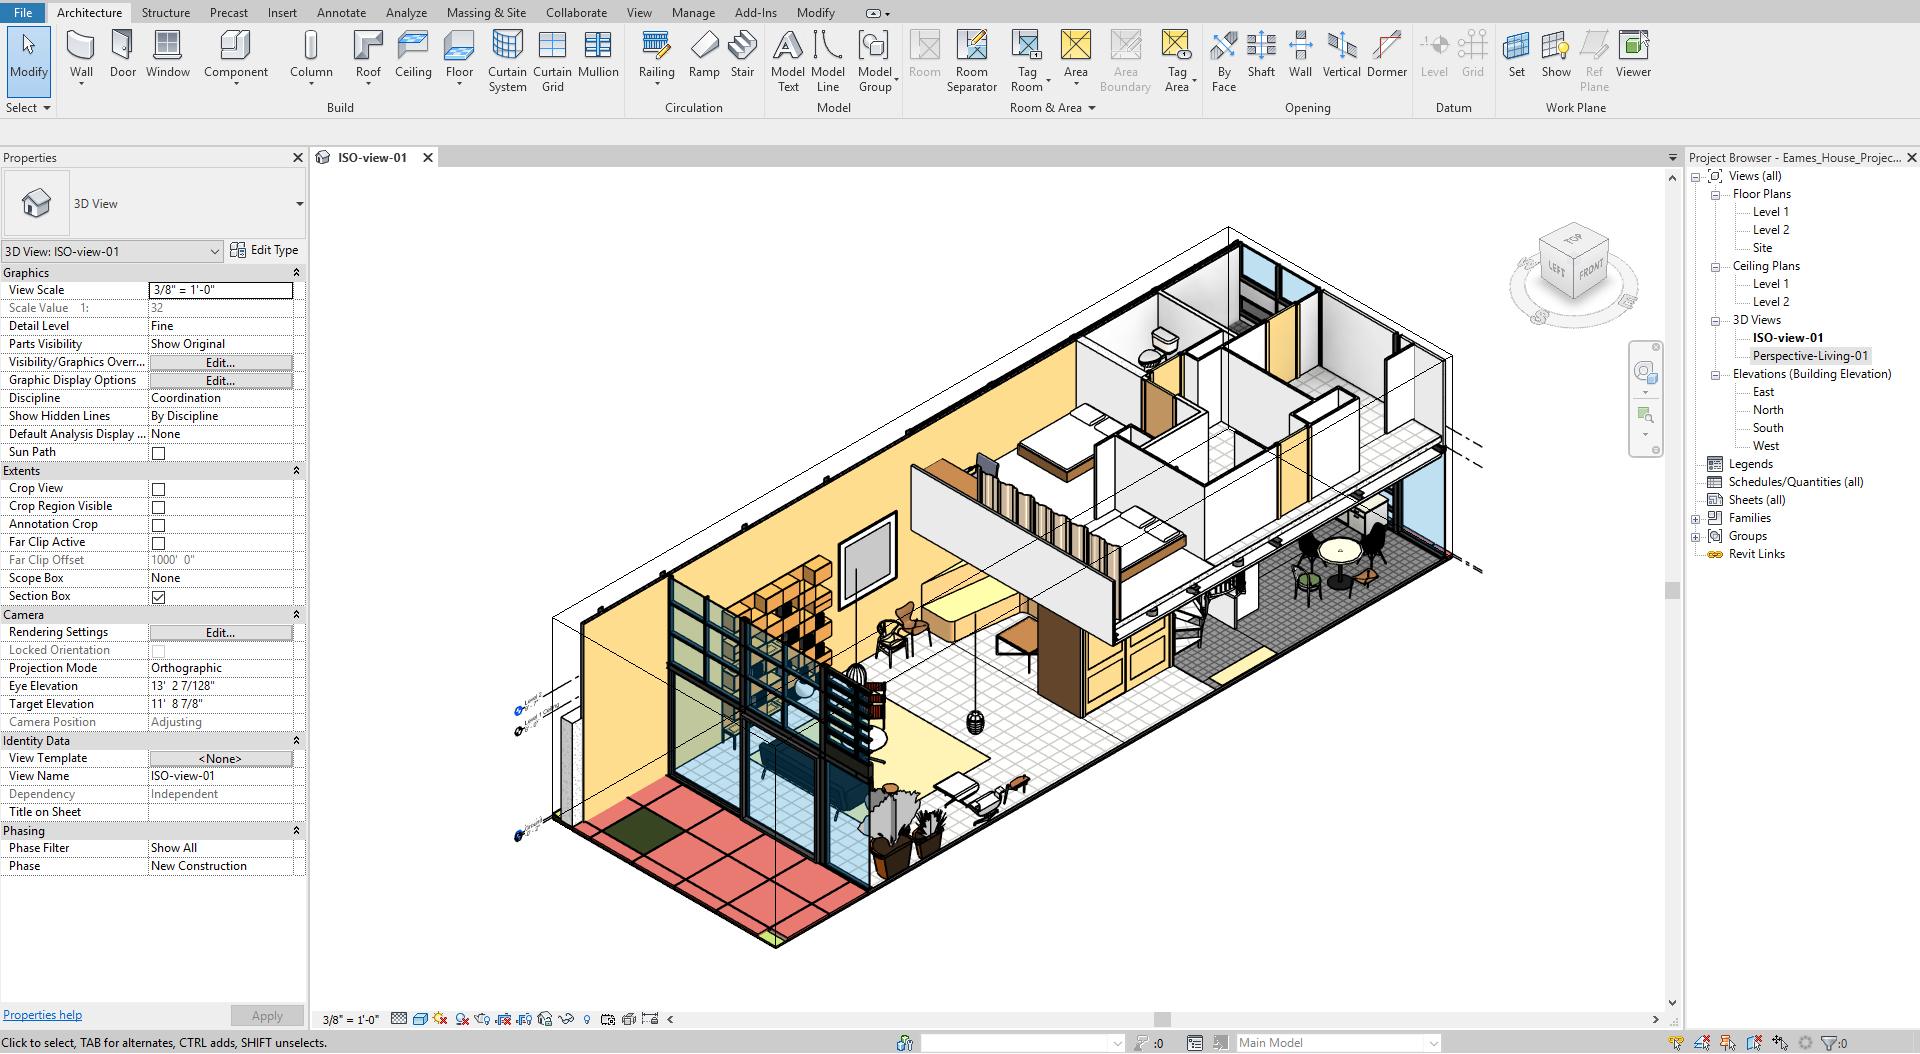 It shows an isometric view of Eames house living area in Revit.